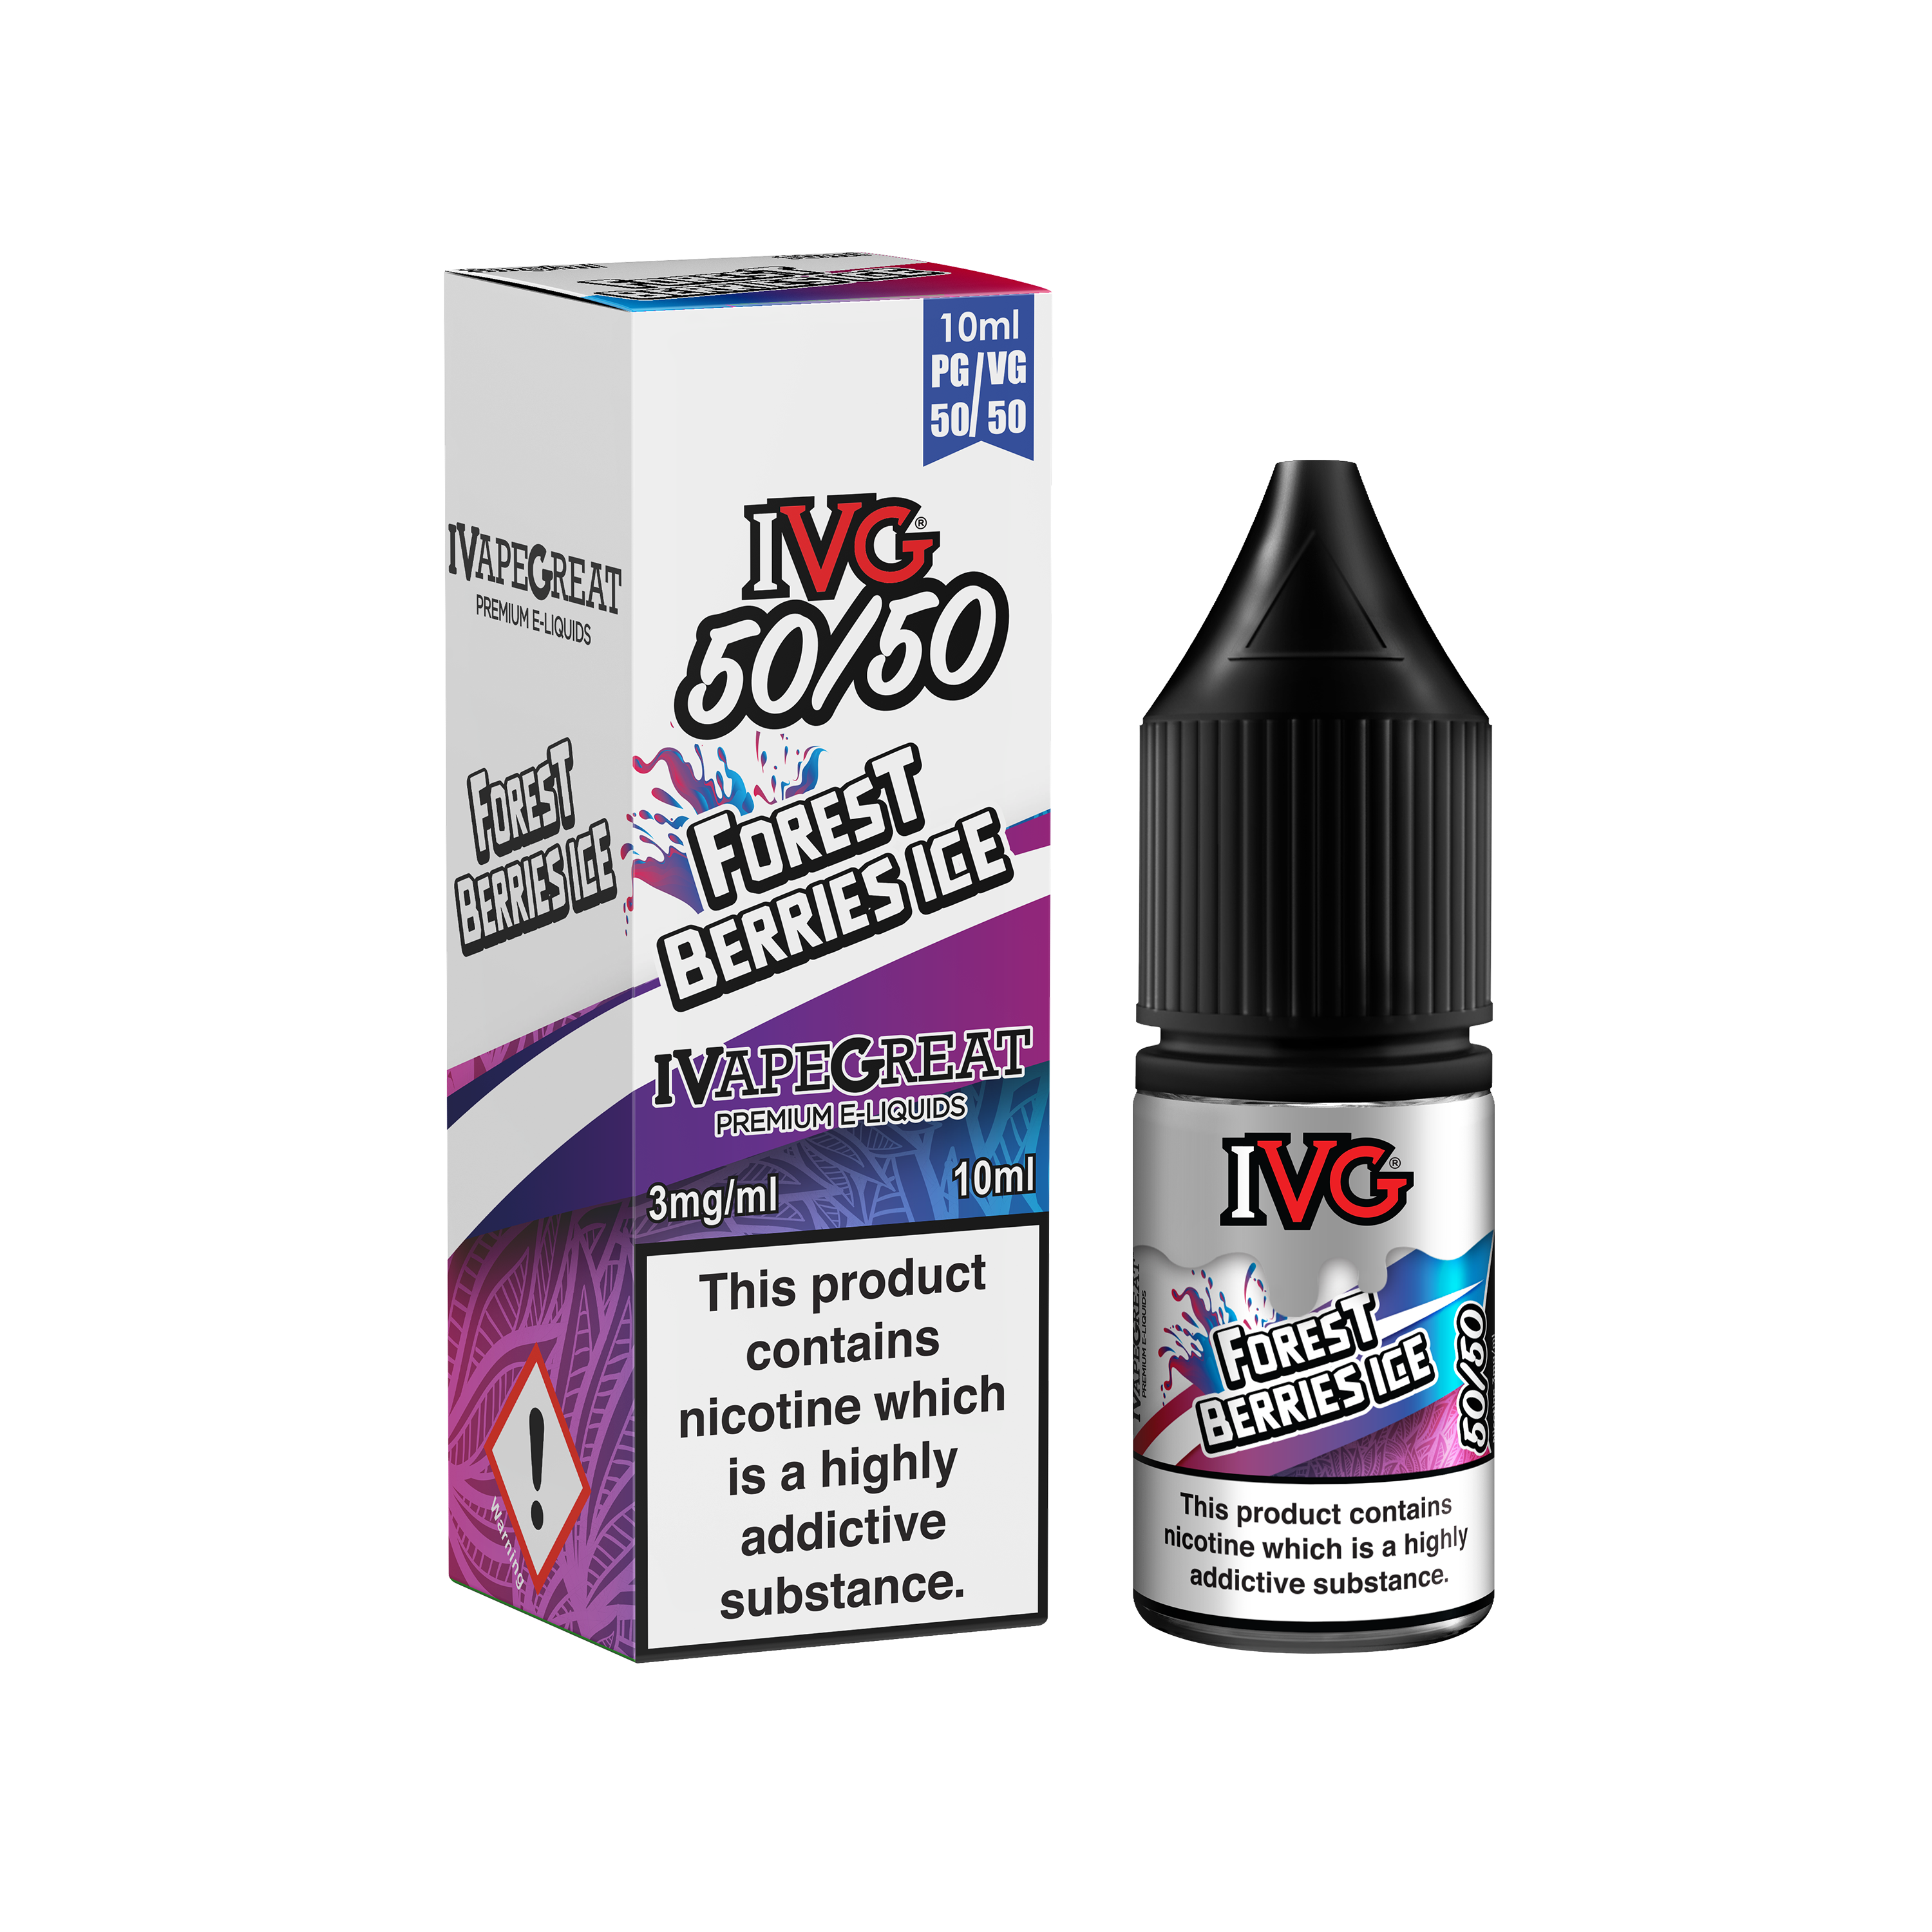 Forest Berries Ice 50/50 by IVG 10ML